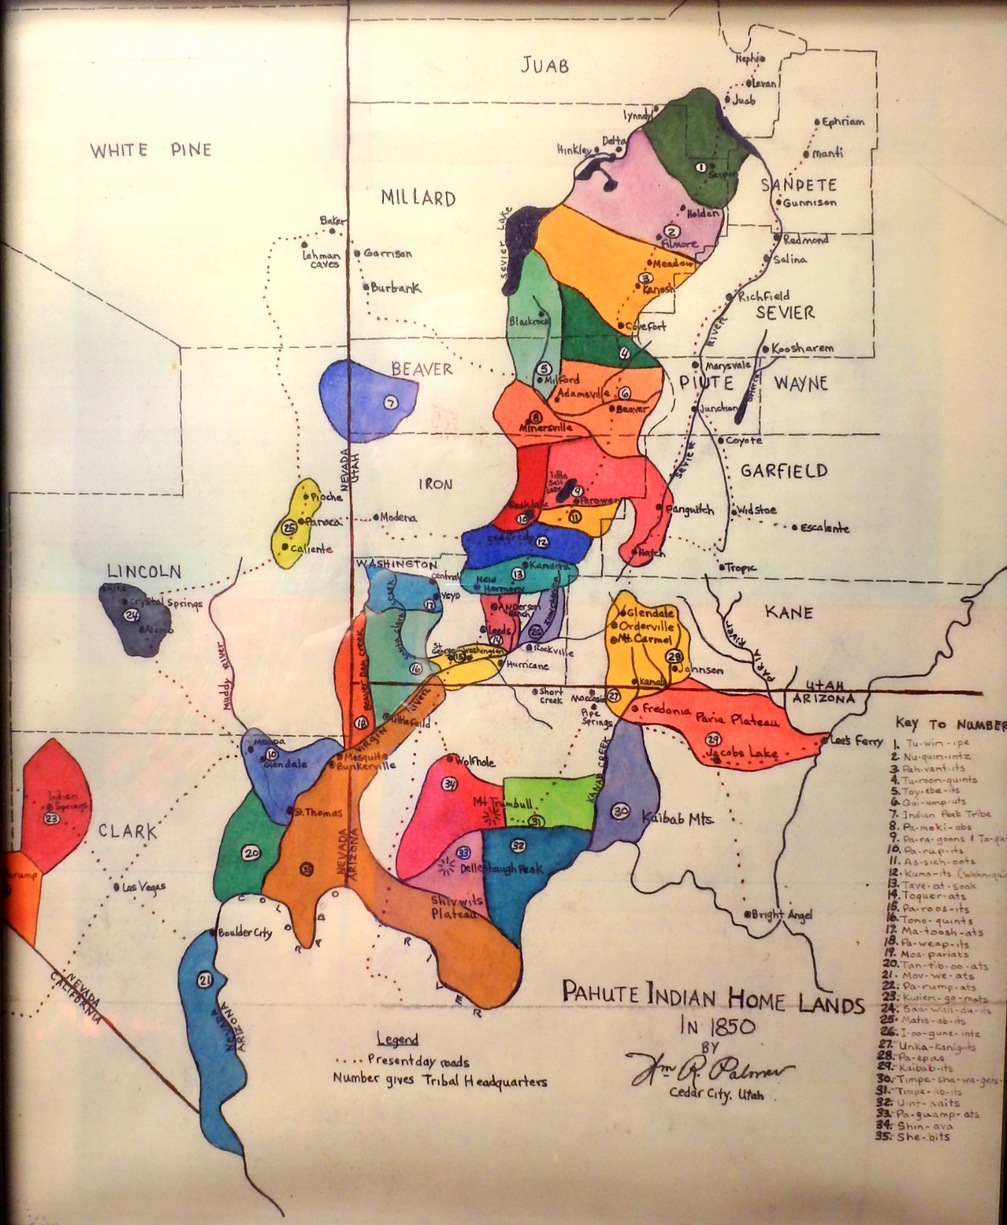 A mapping of the Pahute Tribes in 1850.